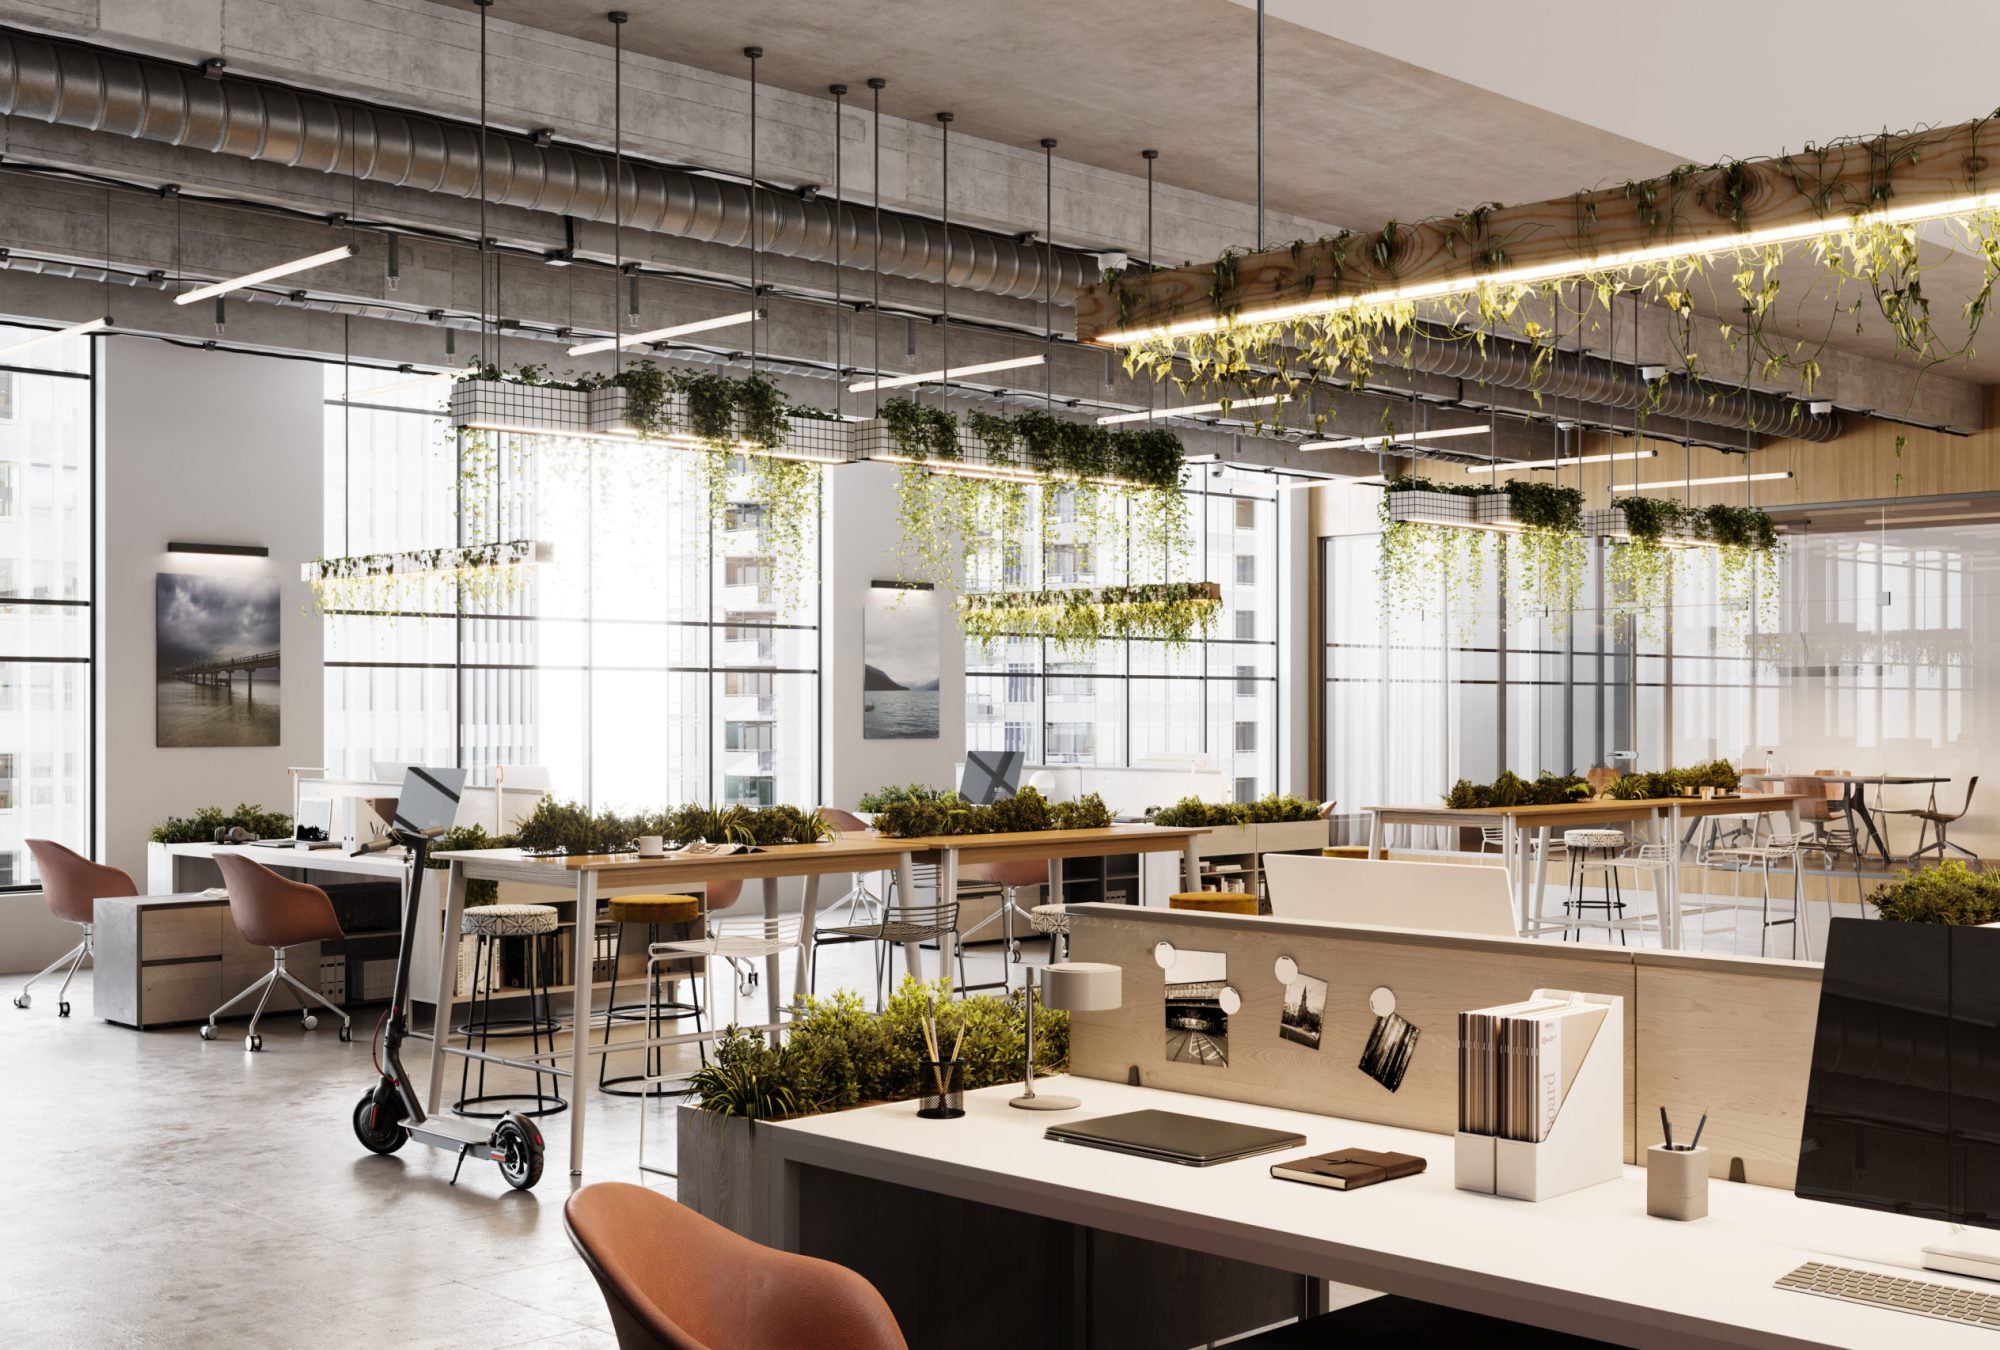 Eco friendly coworking office space in 3D. Computer generated image of an open plan office interior with plants.